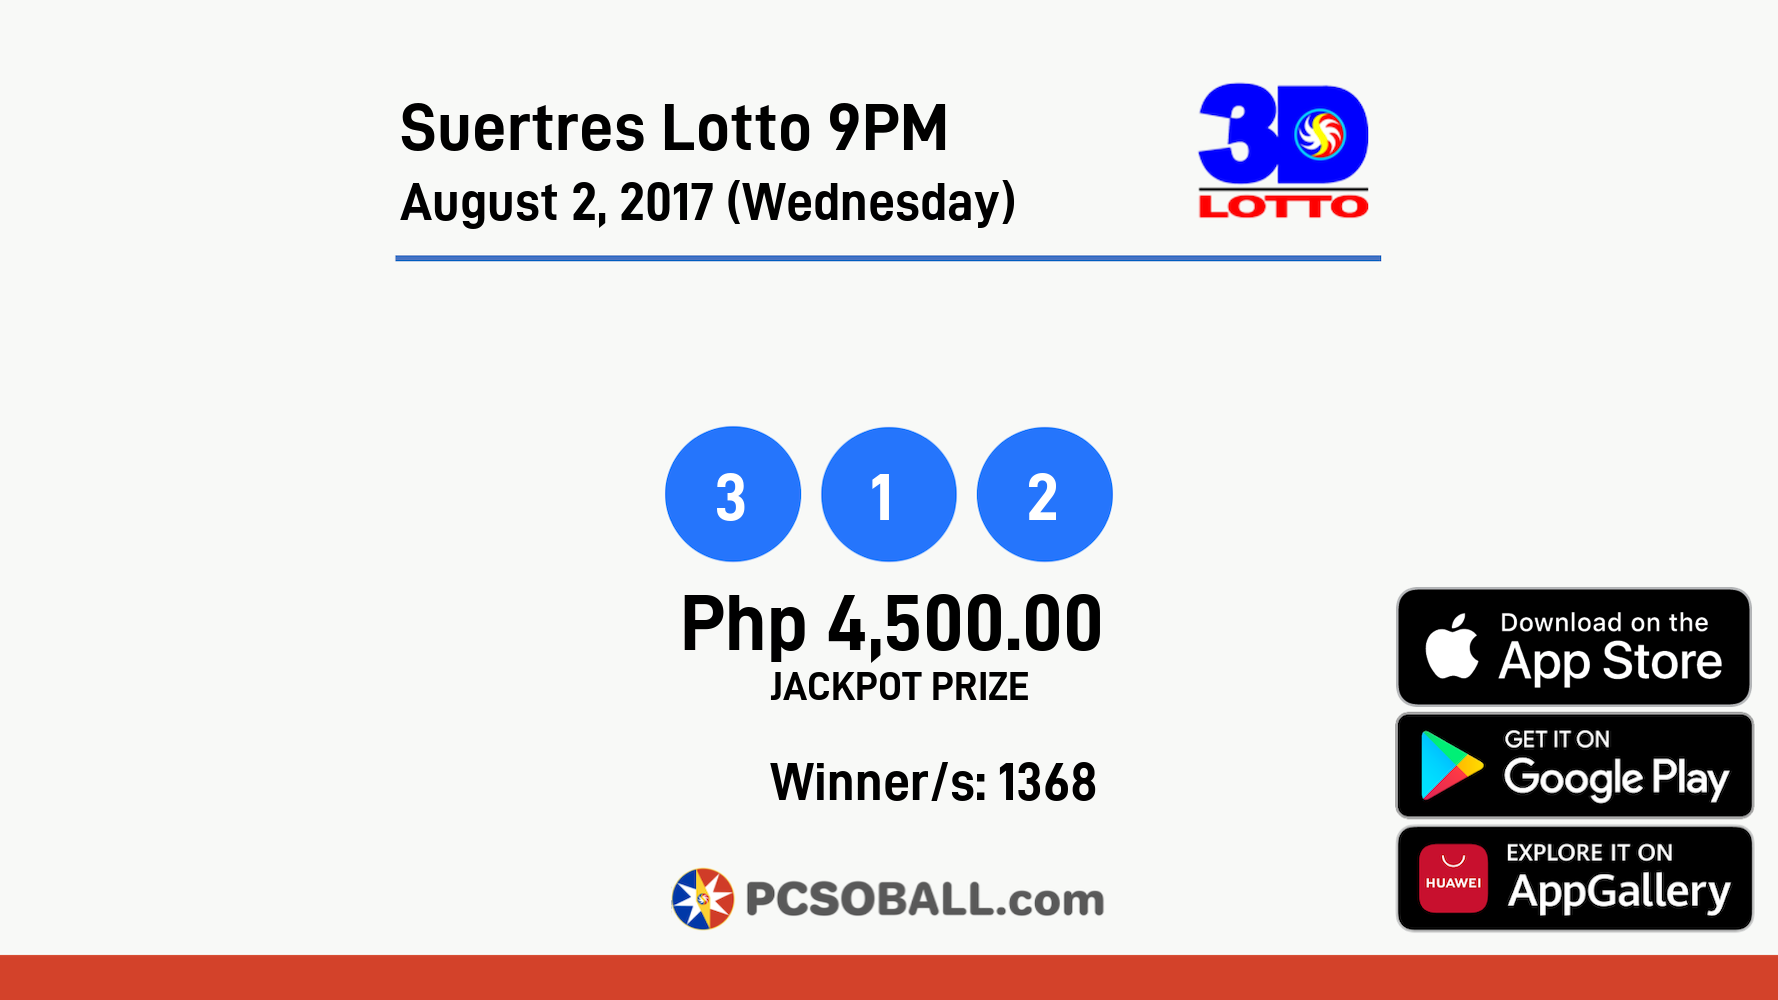 Suertres Lotto 9PM August 2, 2017 (Wednesday) Result